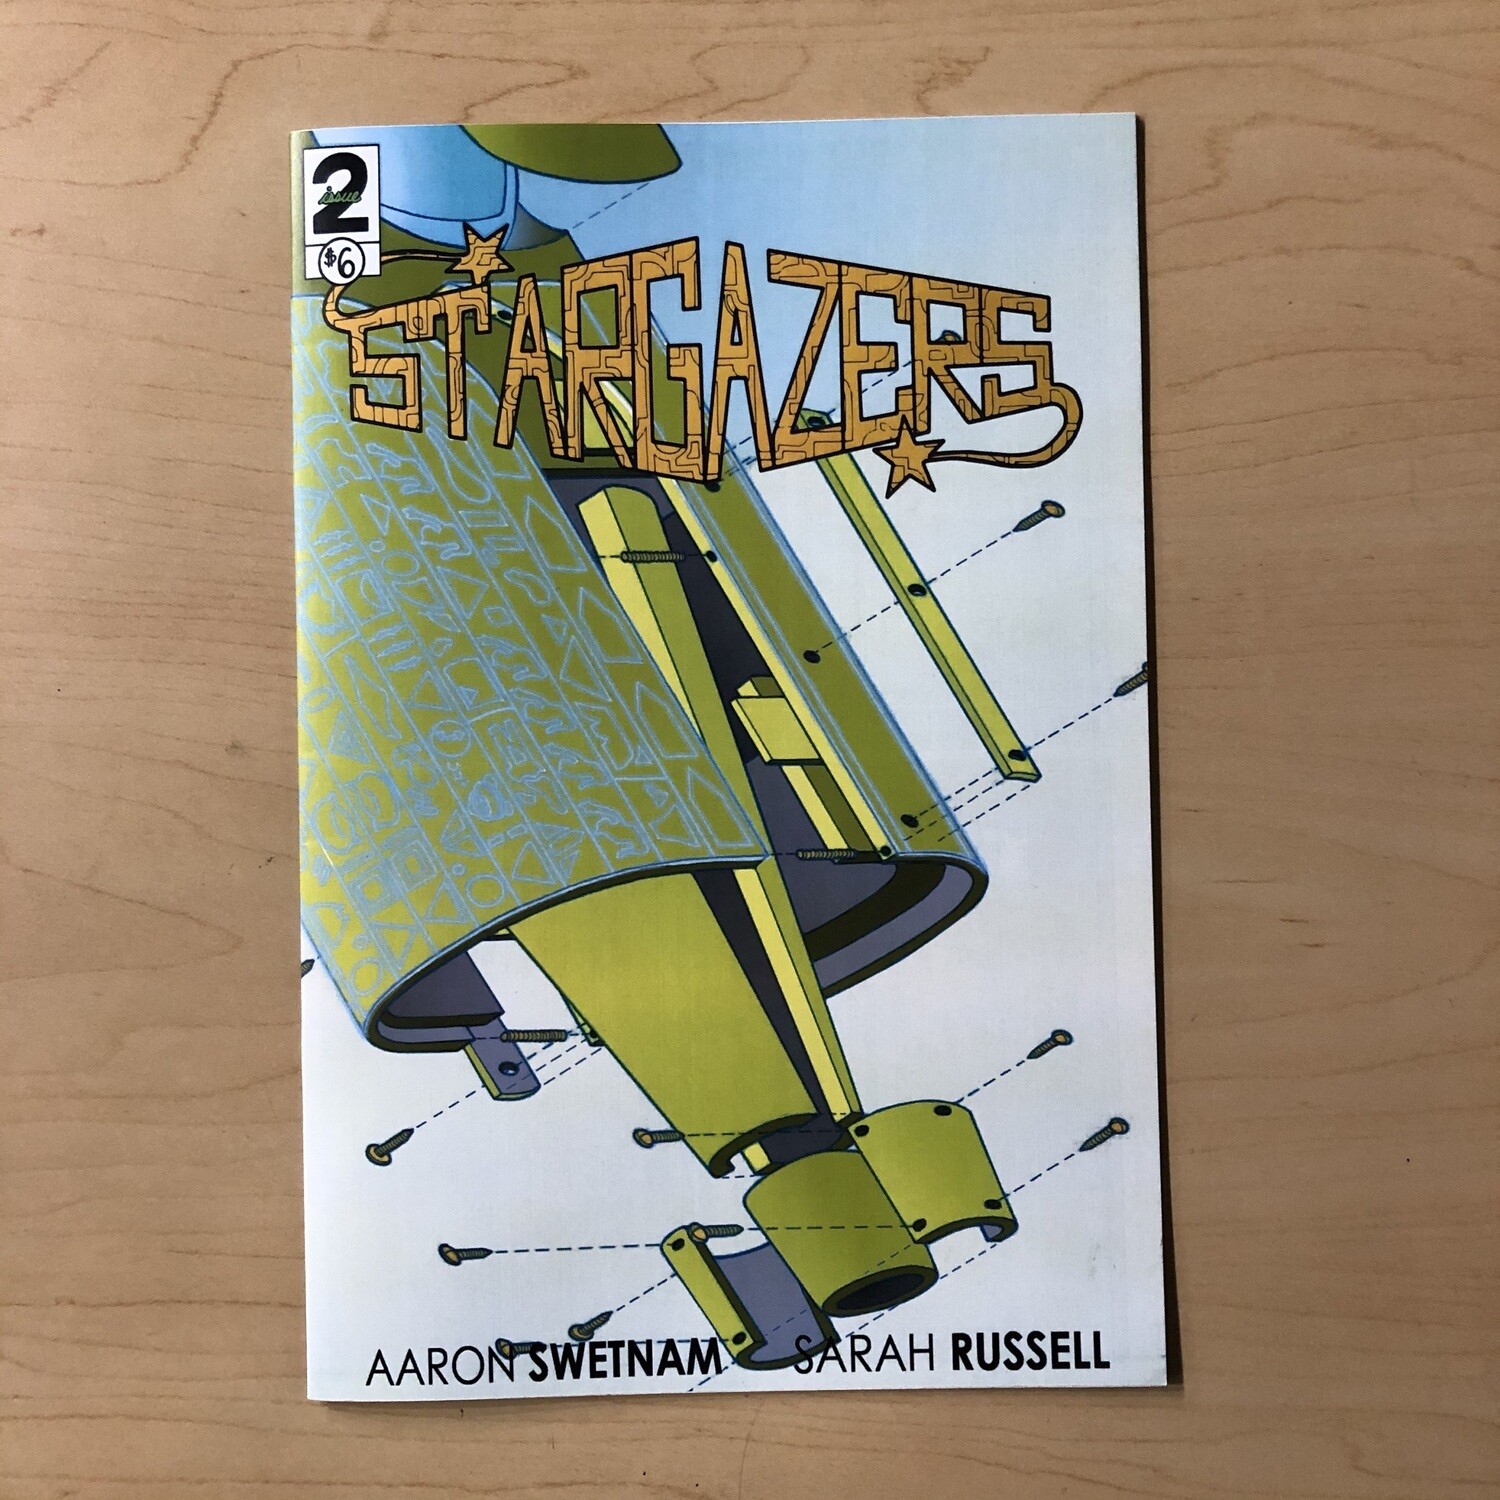 Stargazers #2 - Comic by Aaron Swetnam and Sarah Russell